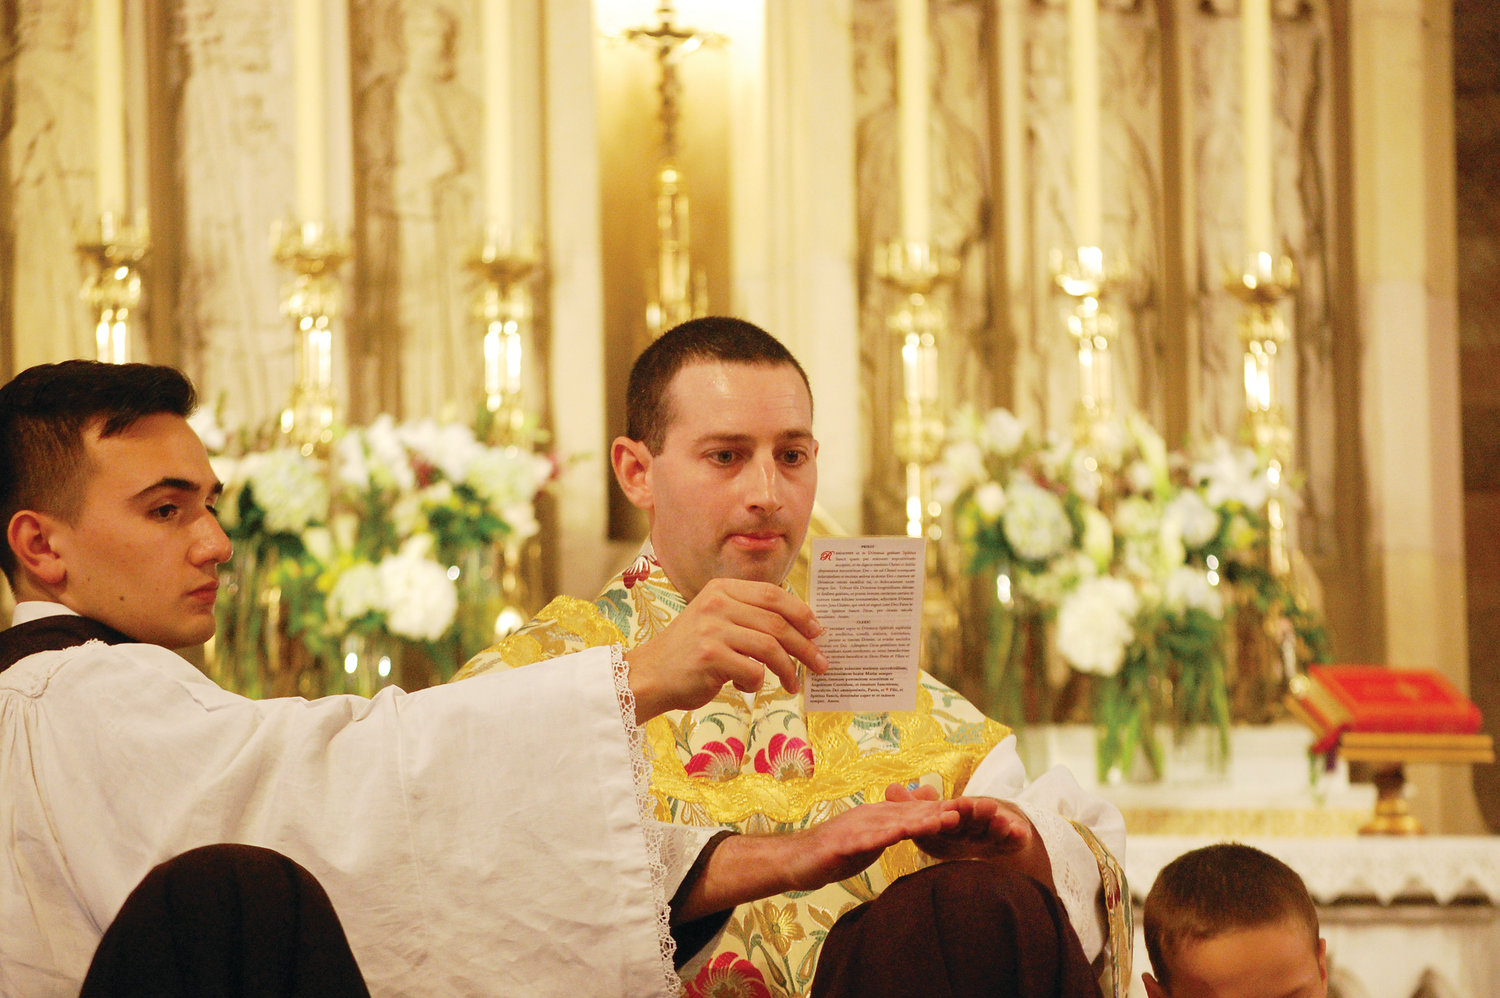 Father Rock confers a priestly blessing after his ordination.